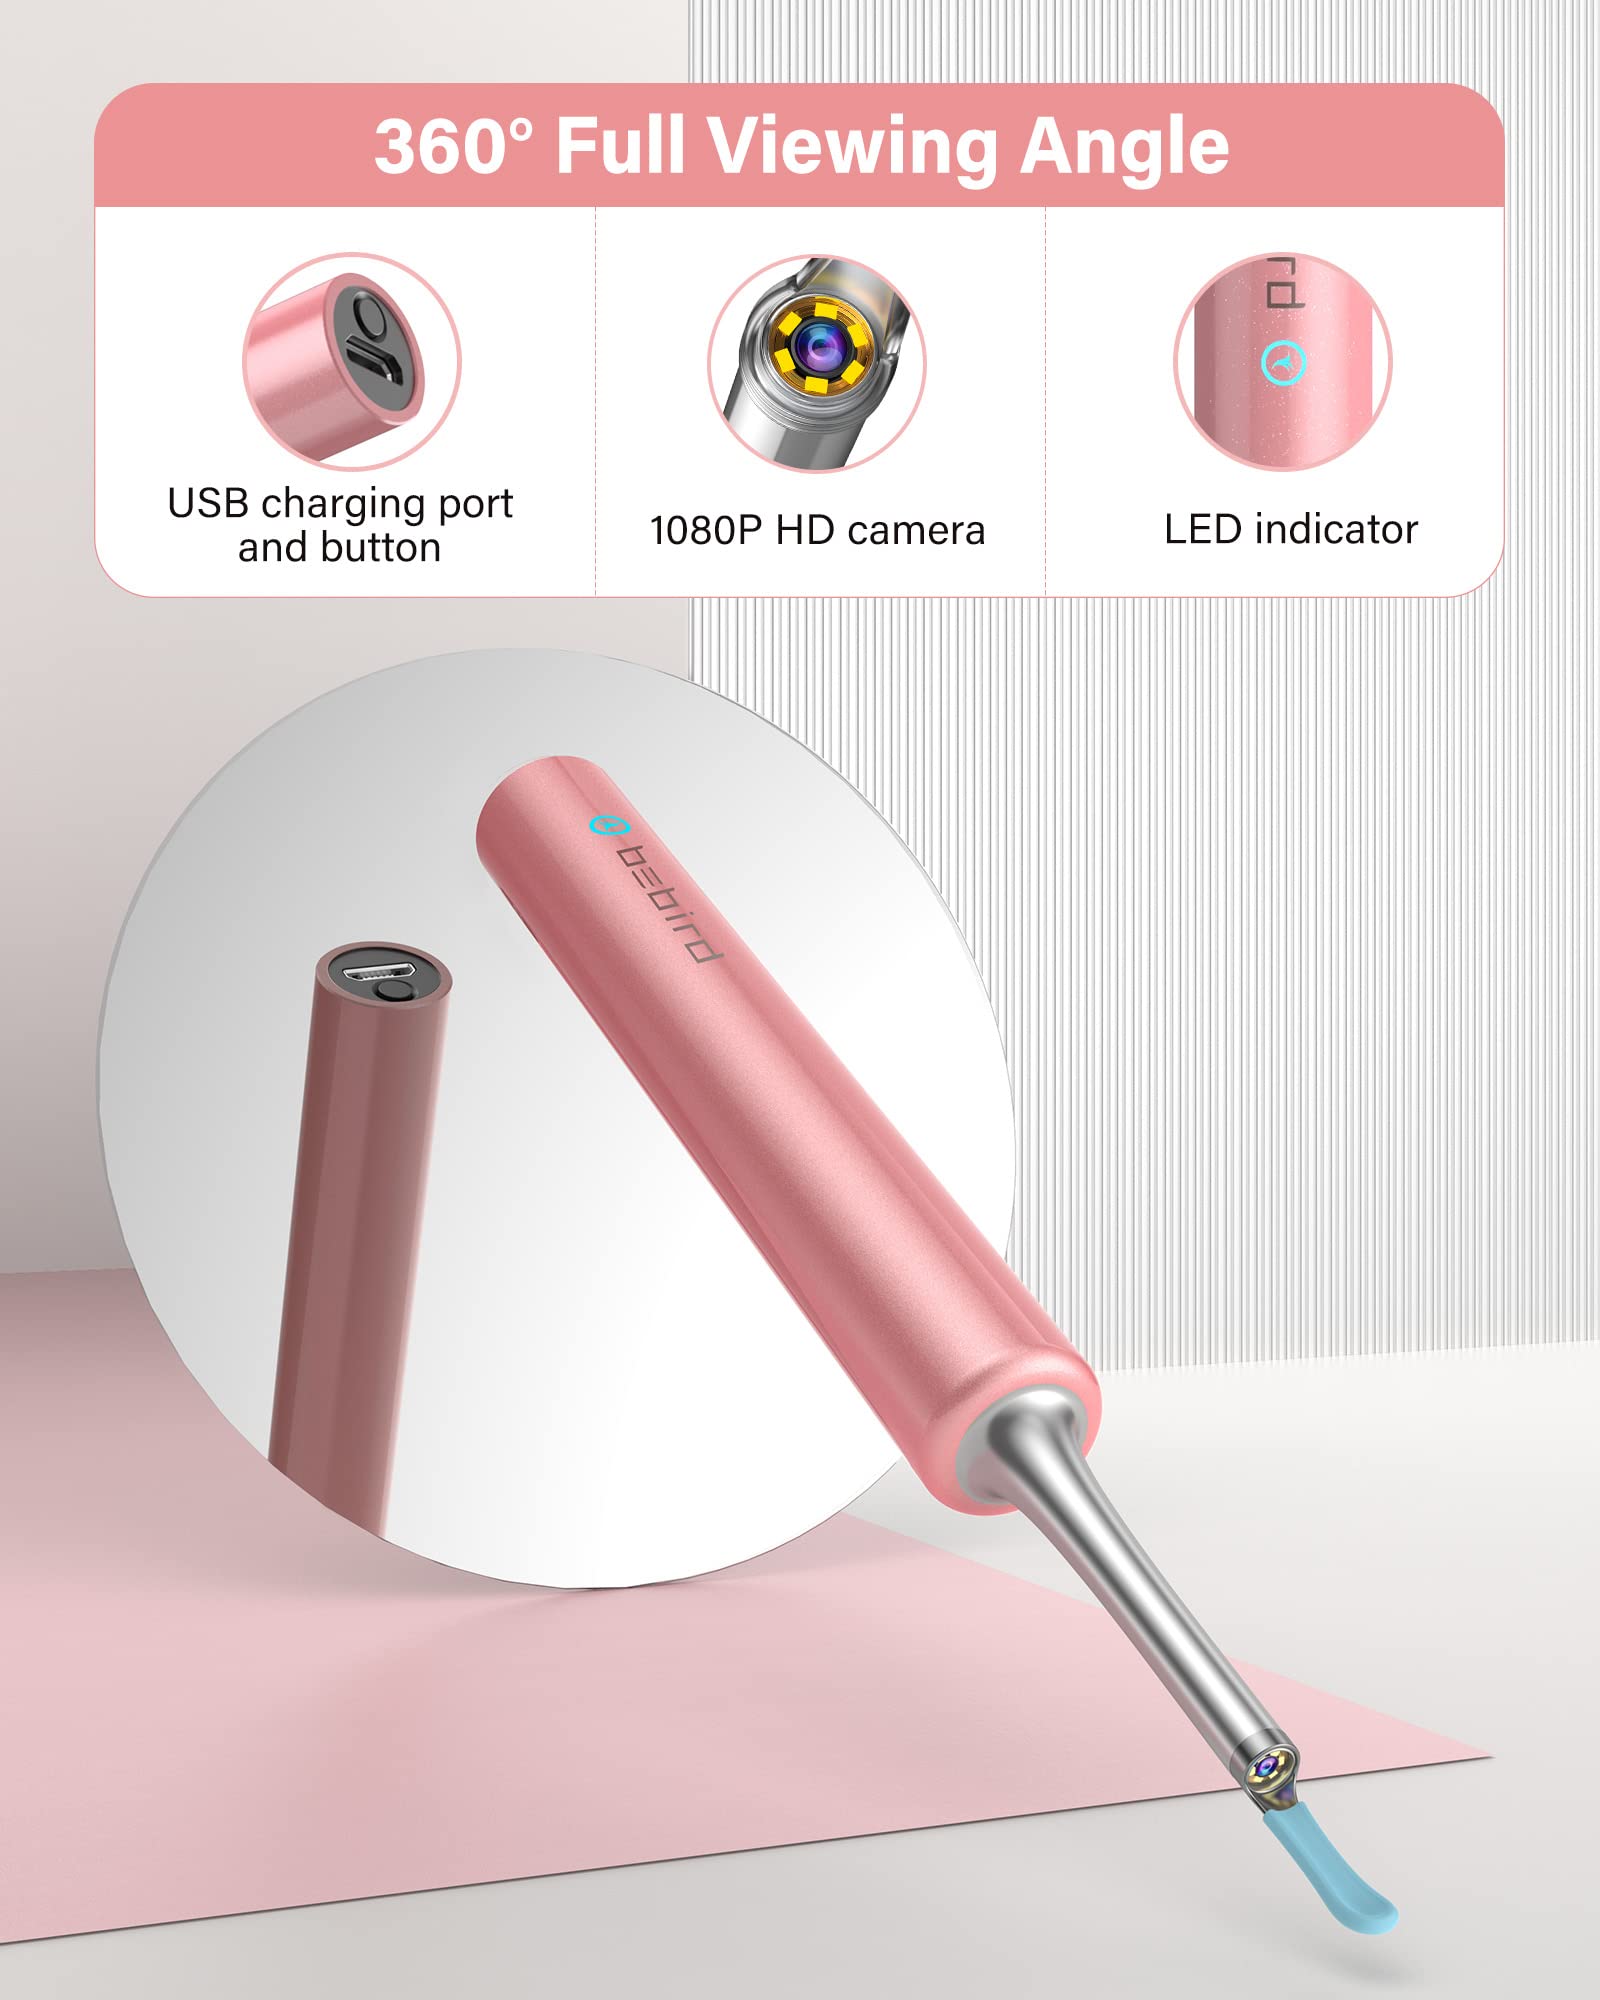 Ear Wax Removal Tool Camera,Ear Wax Removal, Ear Camera with 1080P, Otoscope with Light, Ear Wax Removal Kit with 4 Ear Pick, Ear Camera for iPhone, iPad, Android Phones(Pink)